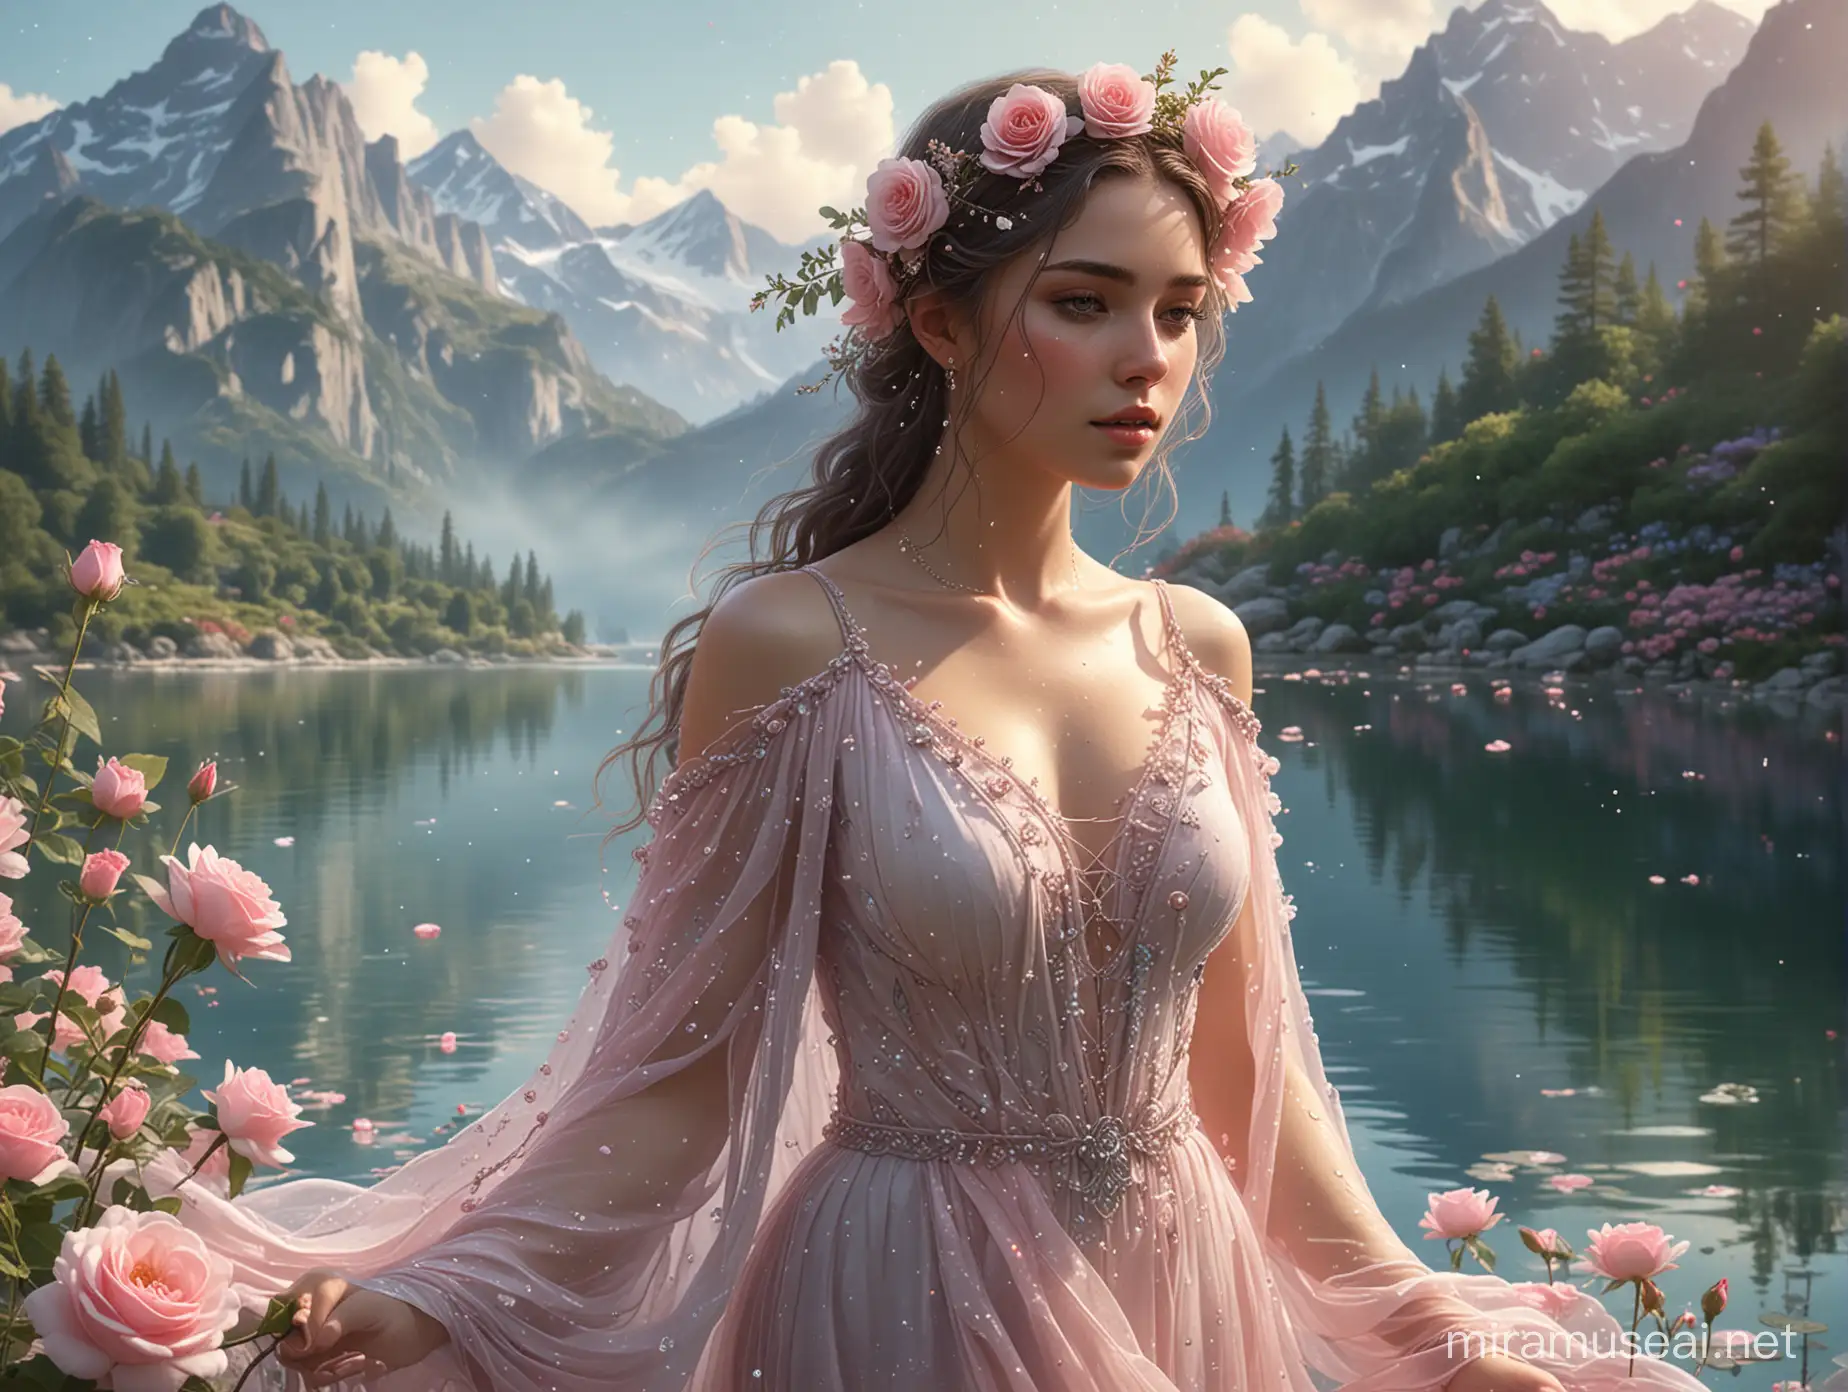 The image is a digitally created featuring a **beautiful female character**. The character is adorned in an elegant, flowing dress that appears to be made of water or some ethereal material. She wears a decorative headpiece with flowers and beads hanging down beside her face. The background depicts a serene and magical landscape with towering mountains, a calm lake surrounded by blooming pink roses. Water splashes around her, adding to the mystical aura of the scene. The color palette consists of soft pinks, blues, and greens creating an enchanting atmosphere. hyperrealistic. UHD extreme